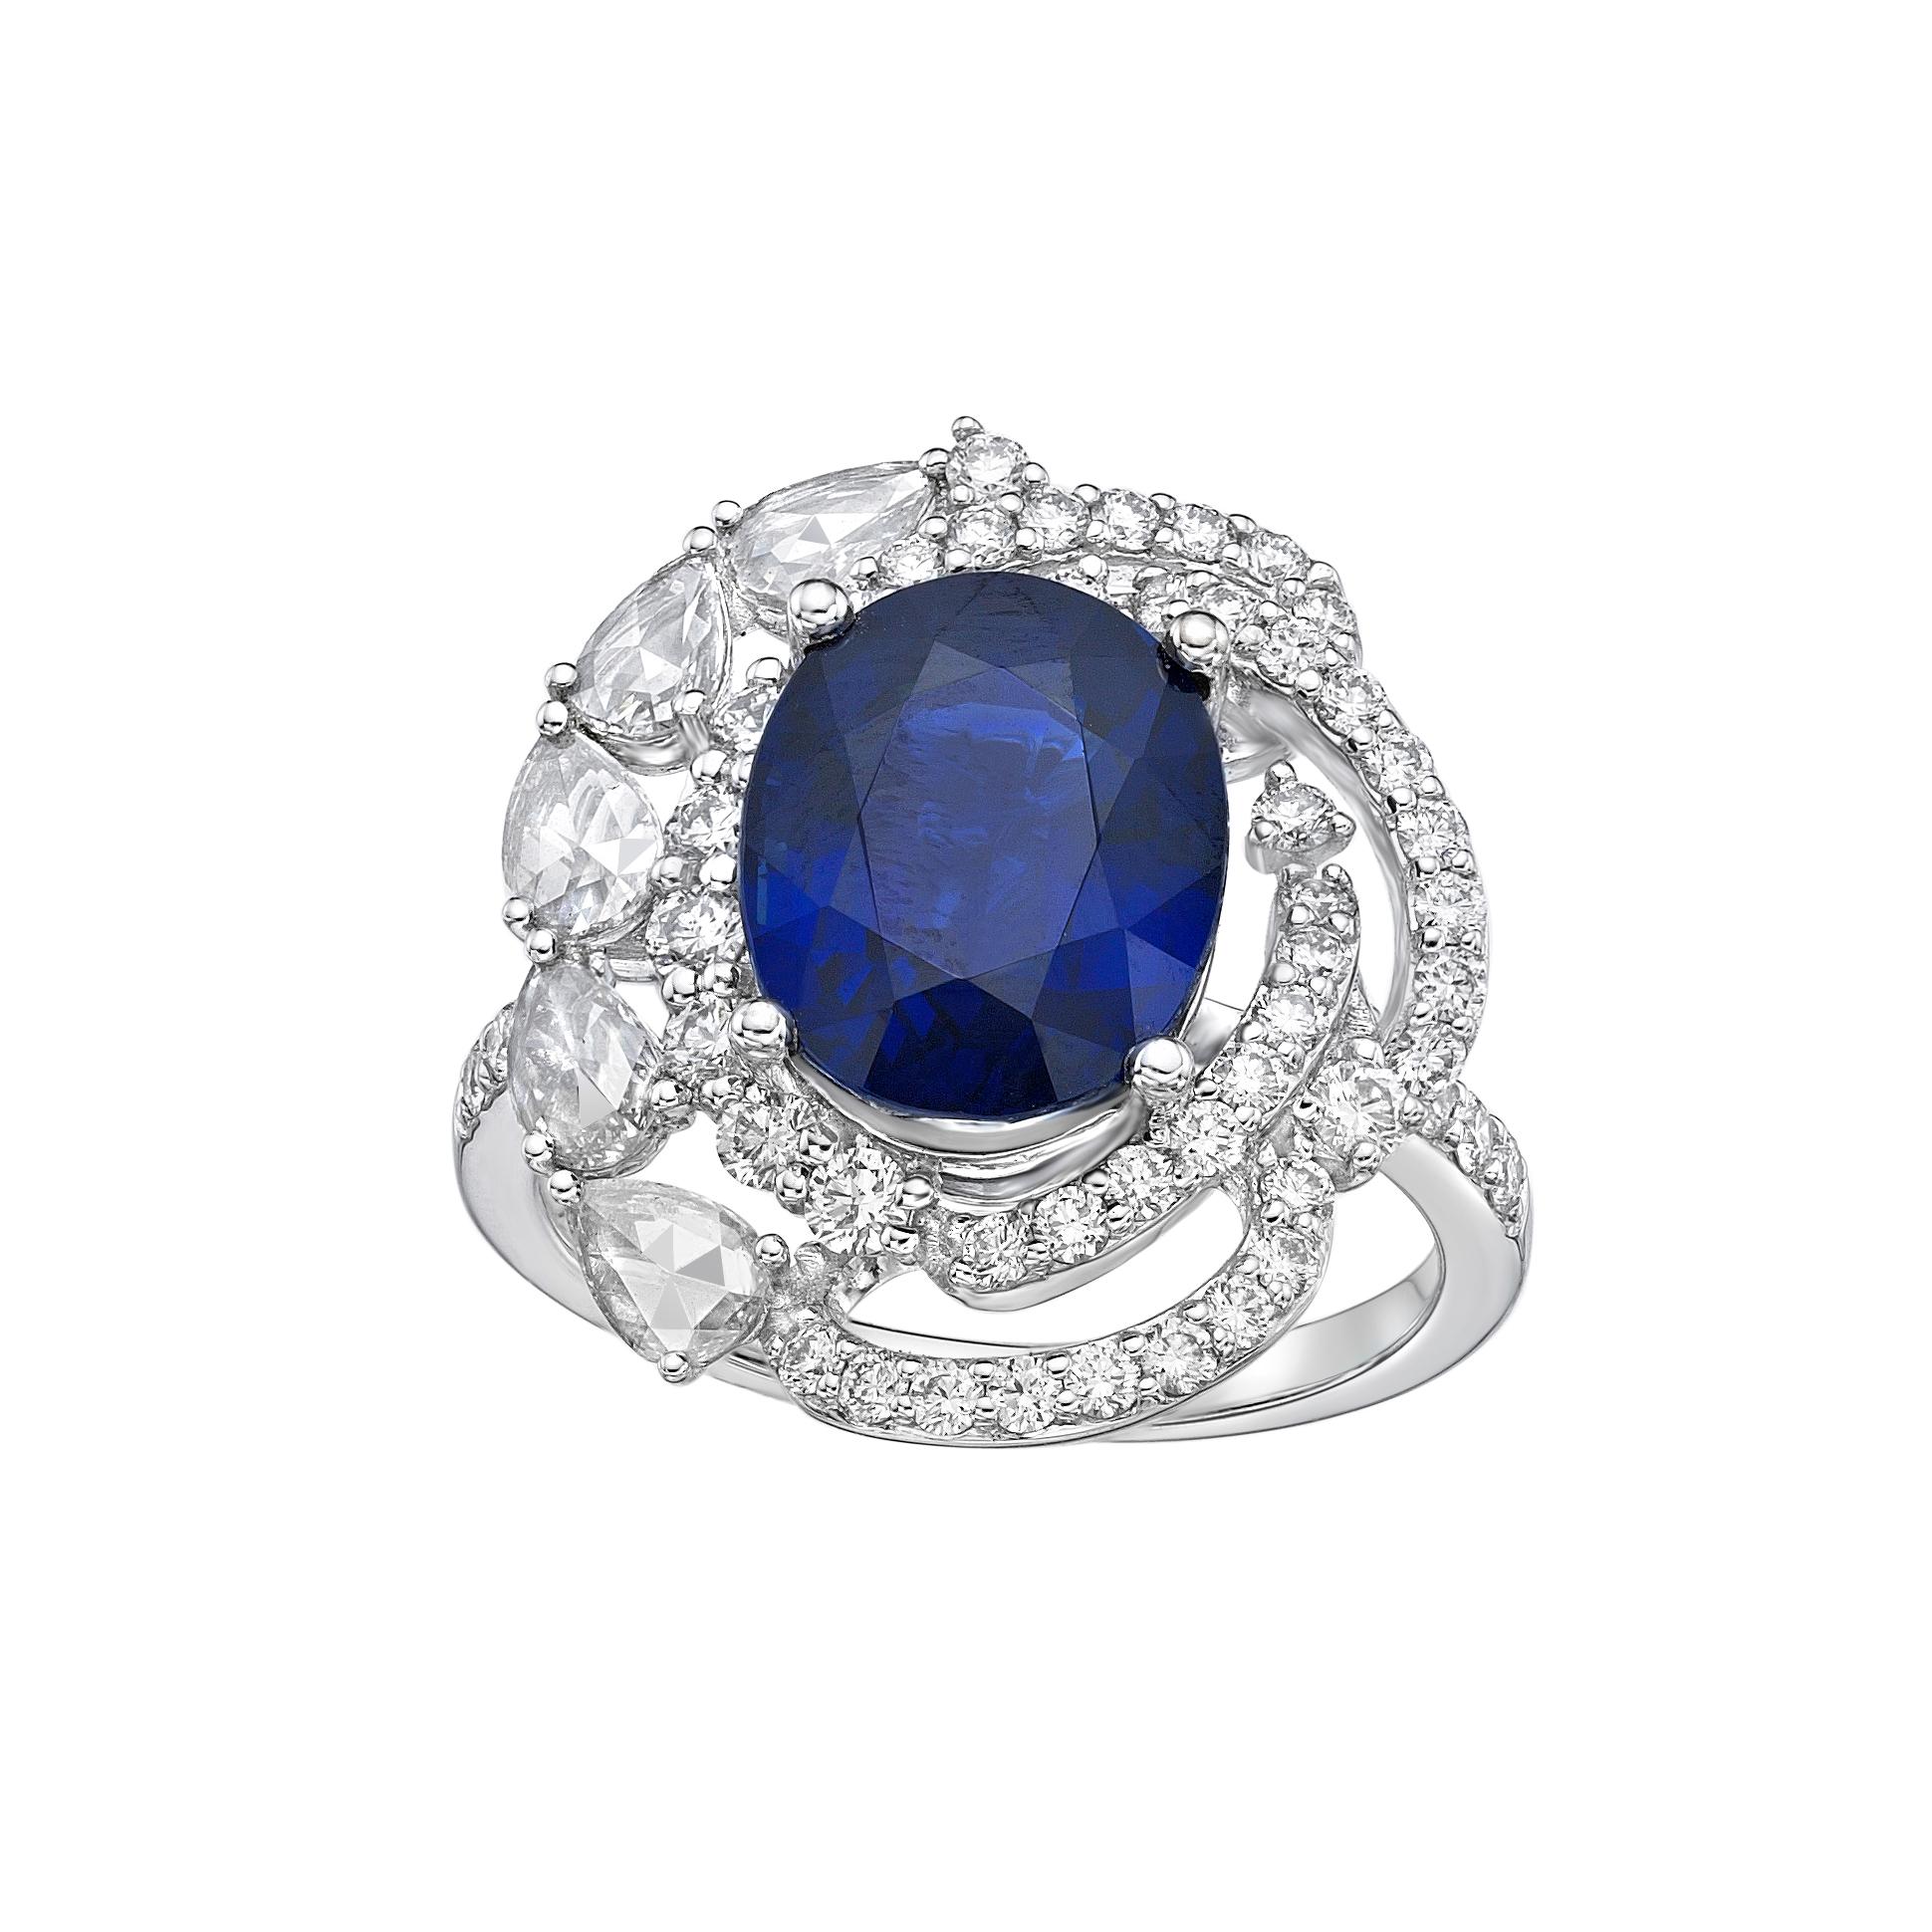 GRS Certified 5.89 Carat Vivid Blue Sapphire & Diamond Ring in 18K White Gold In New Condition For Sale In Hong Kong, HK